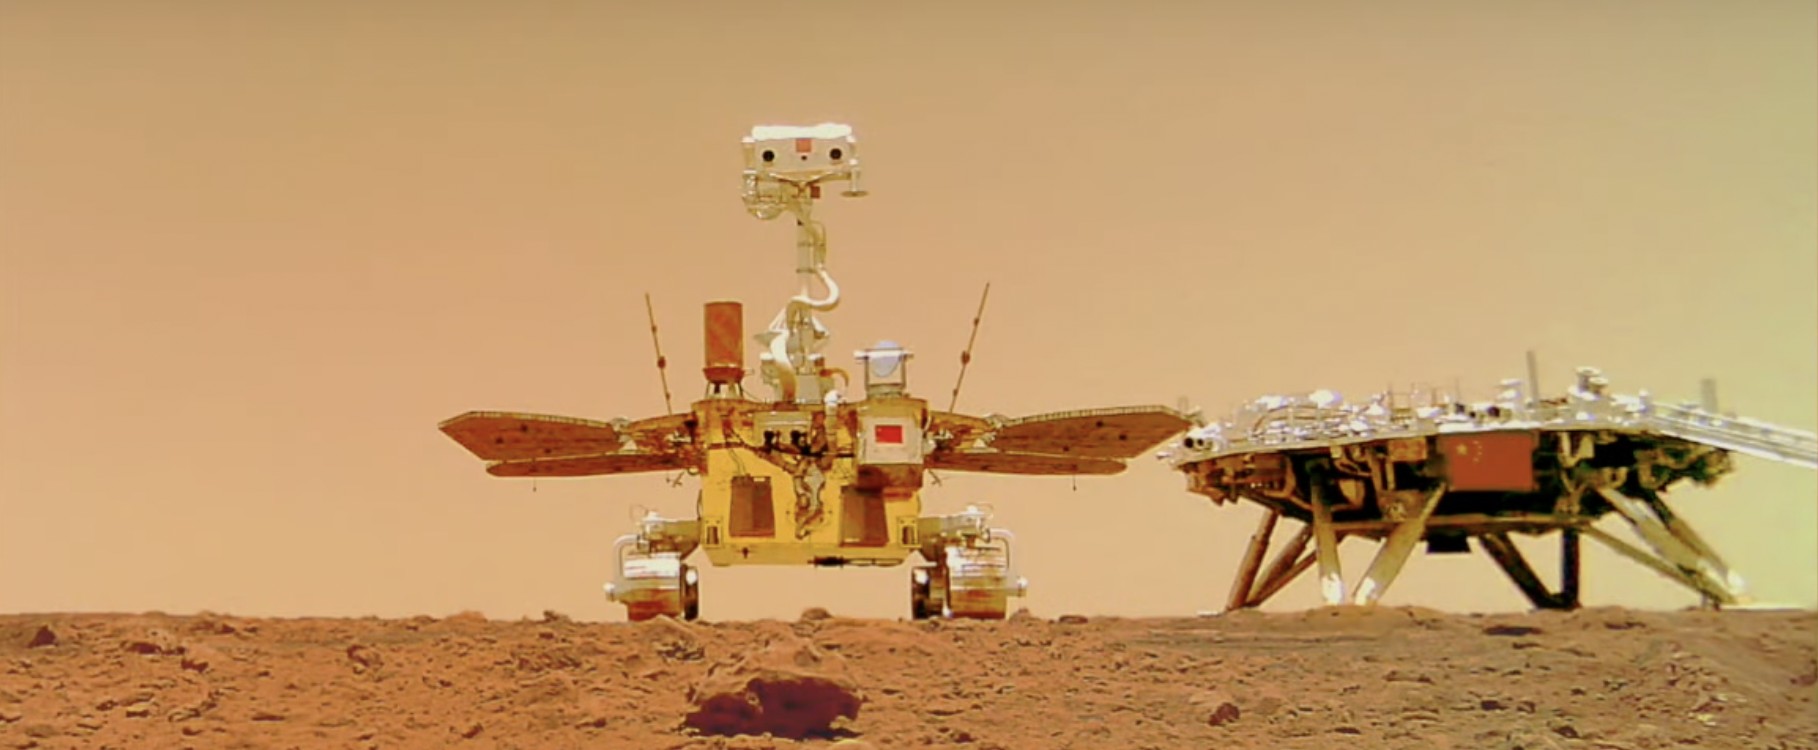 2020: An Optimal Year for Mars Missions with China’s Ambitious Plans